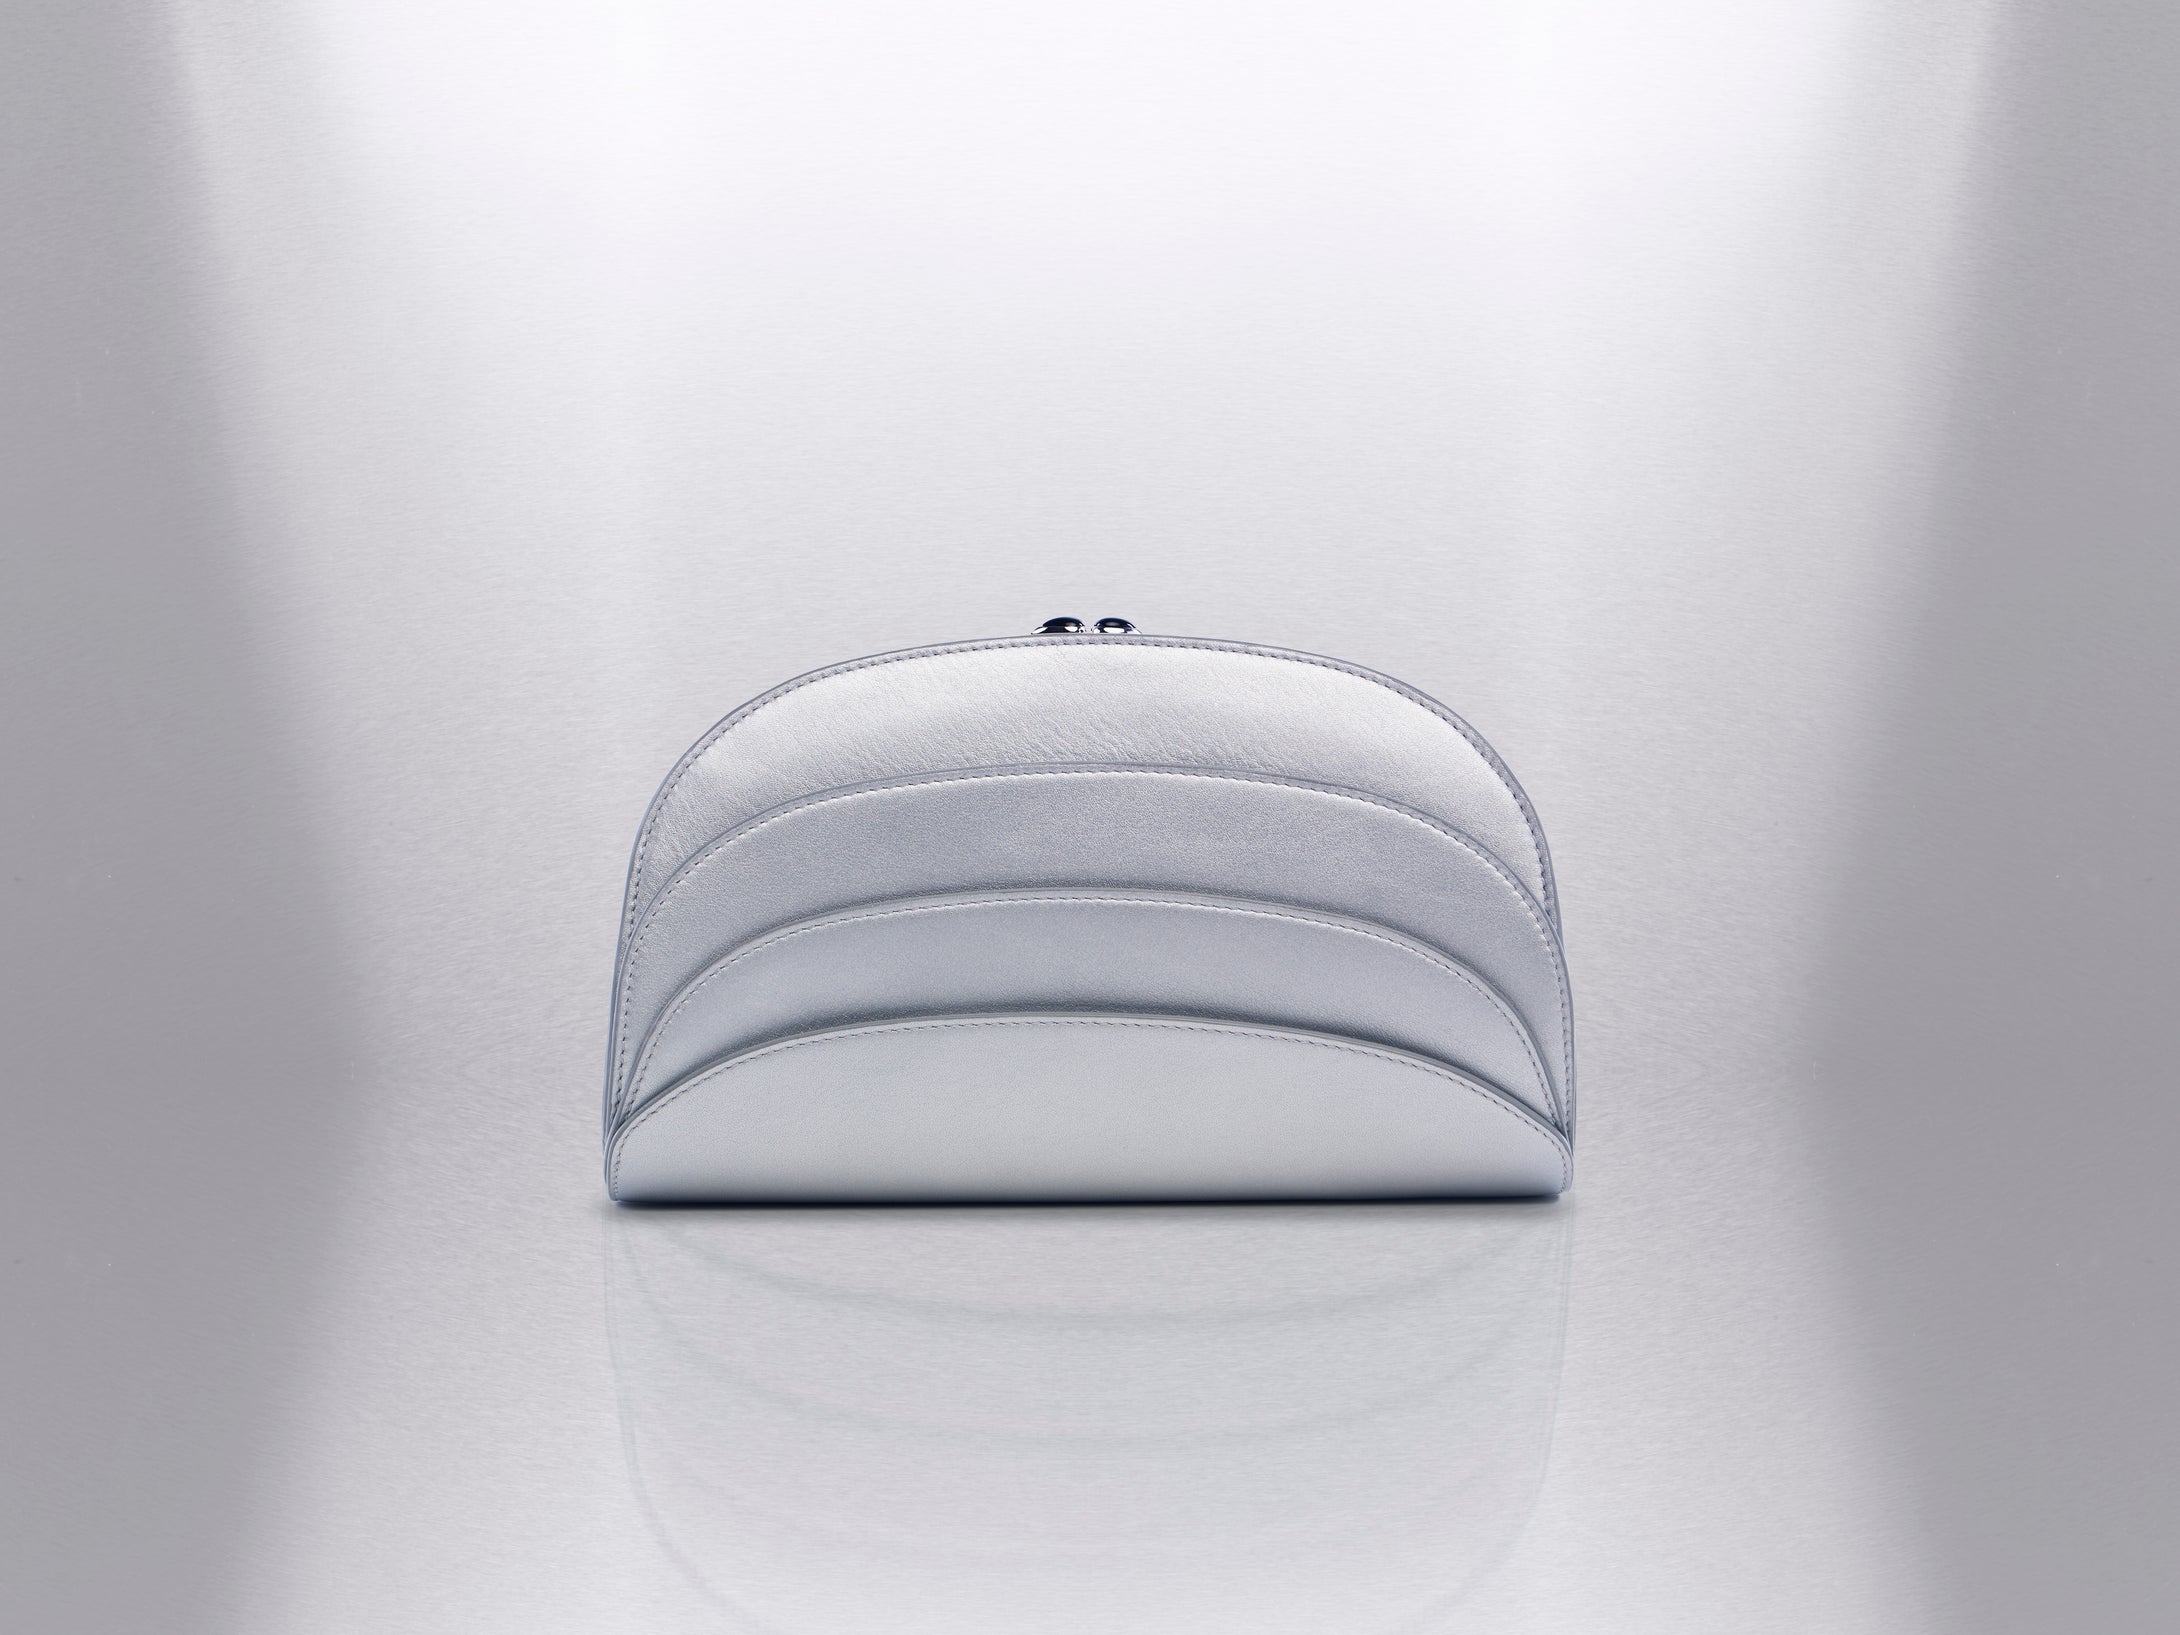 Gabo Guzzo Millefoglie C clutch bag in silver calfskin and palladium plated hardware. One-of-a-kind creation embellished with fine jewellery and handcrafted in Italy.